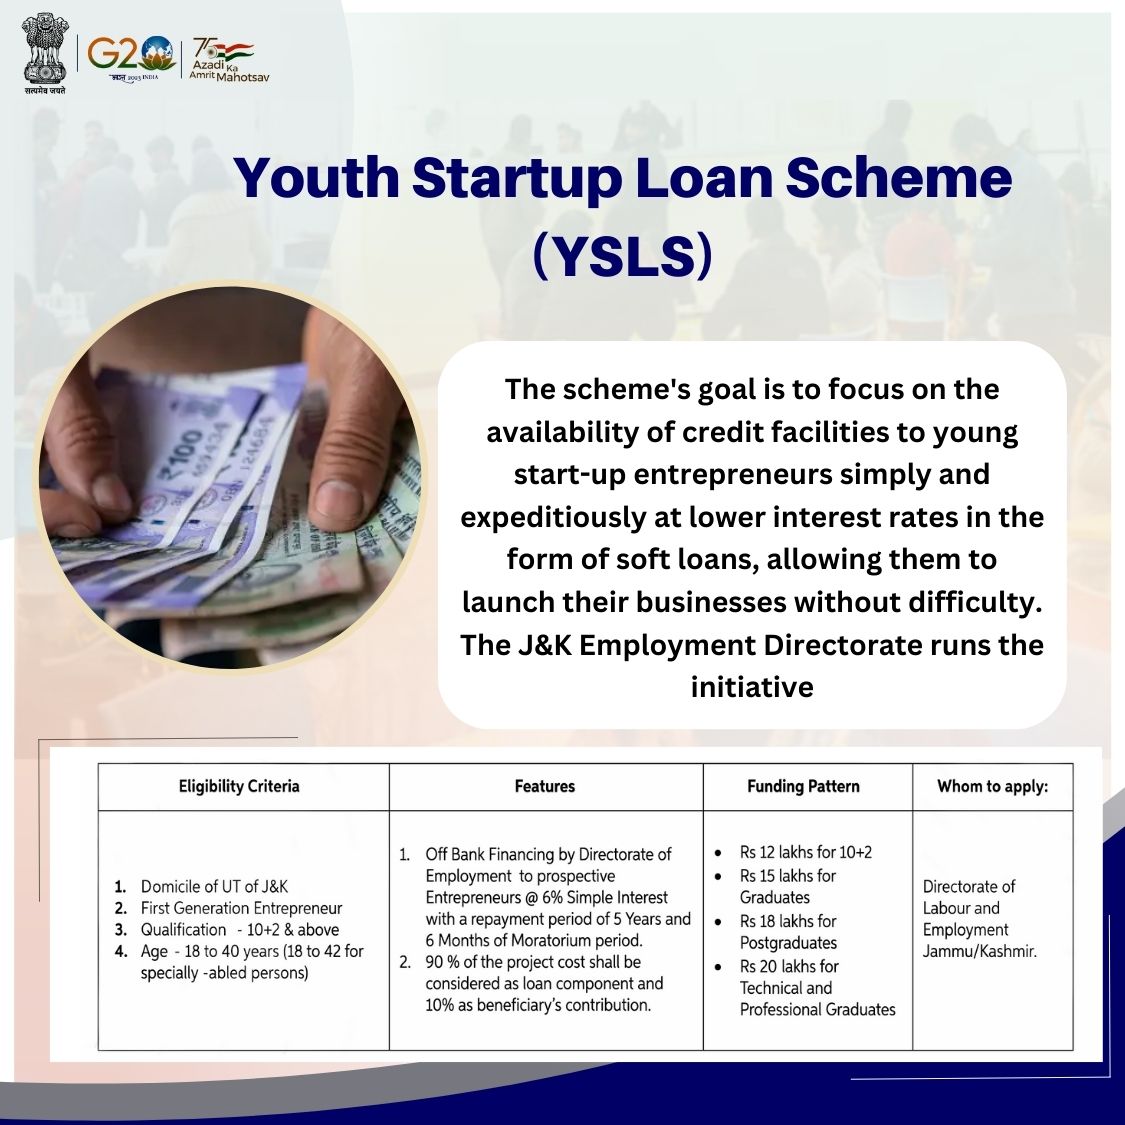 J&K Employment Directorate's Youth Startup Loan Scheme (YSLS) focusses on the availability of credit facilities to young start-up entrepreneurs simply and expeditiously at lower interest rates in the form of soft loans. #YouthEmpowermentJK